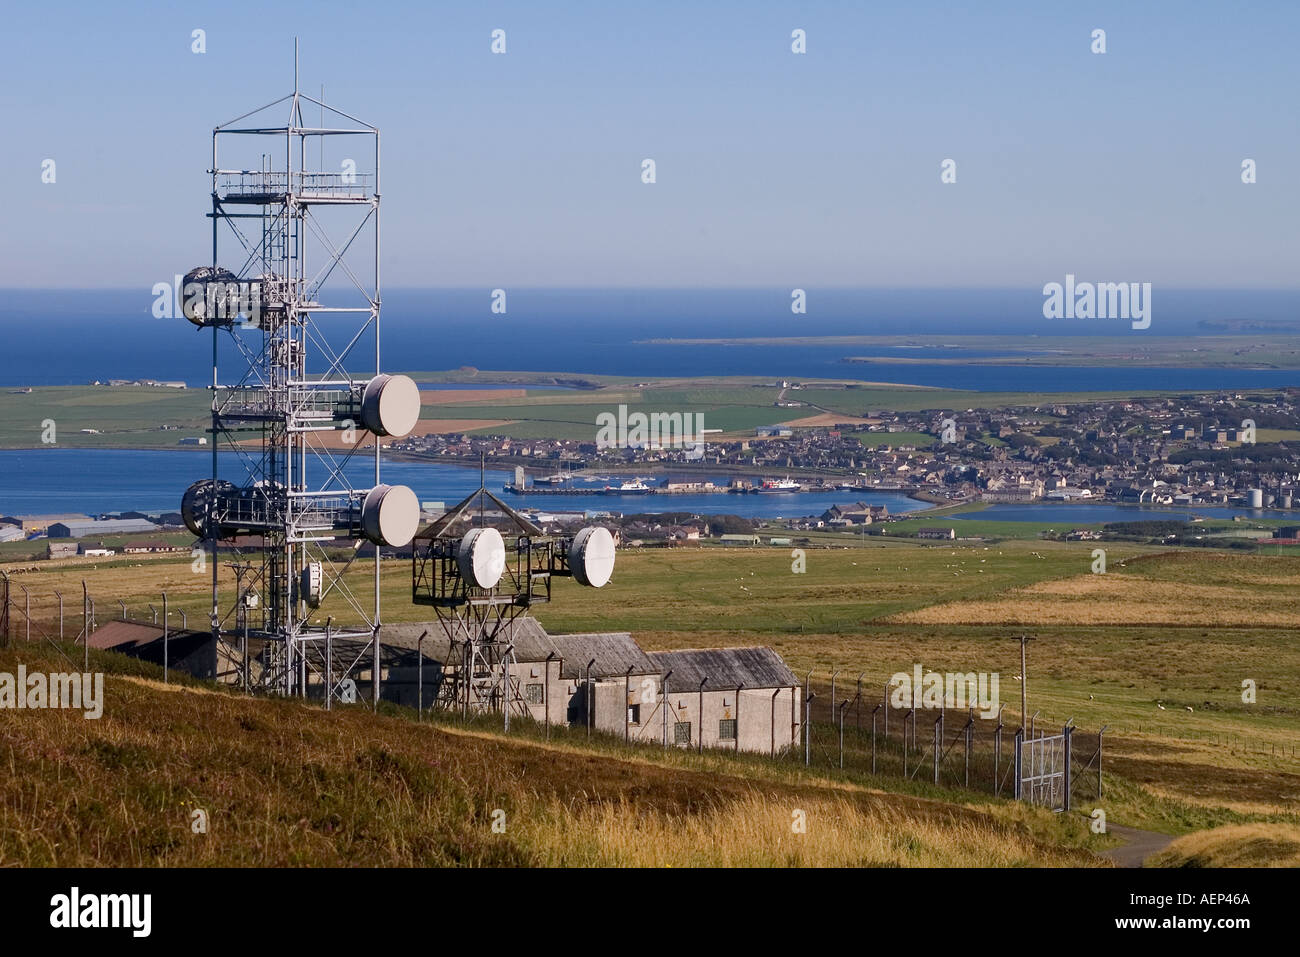 dh Wideforth Hill ST OLA ORKNEY Telecommunications Microwave relay antenna tower data phone mast dish telephone telecoms towers telecom scotland uk Stock Photo